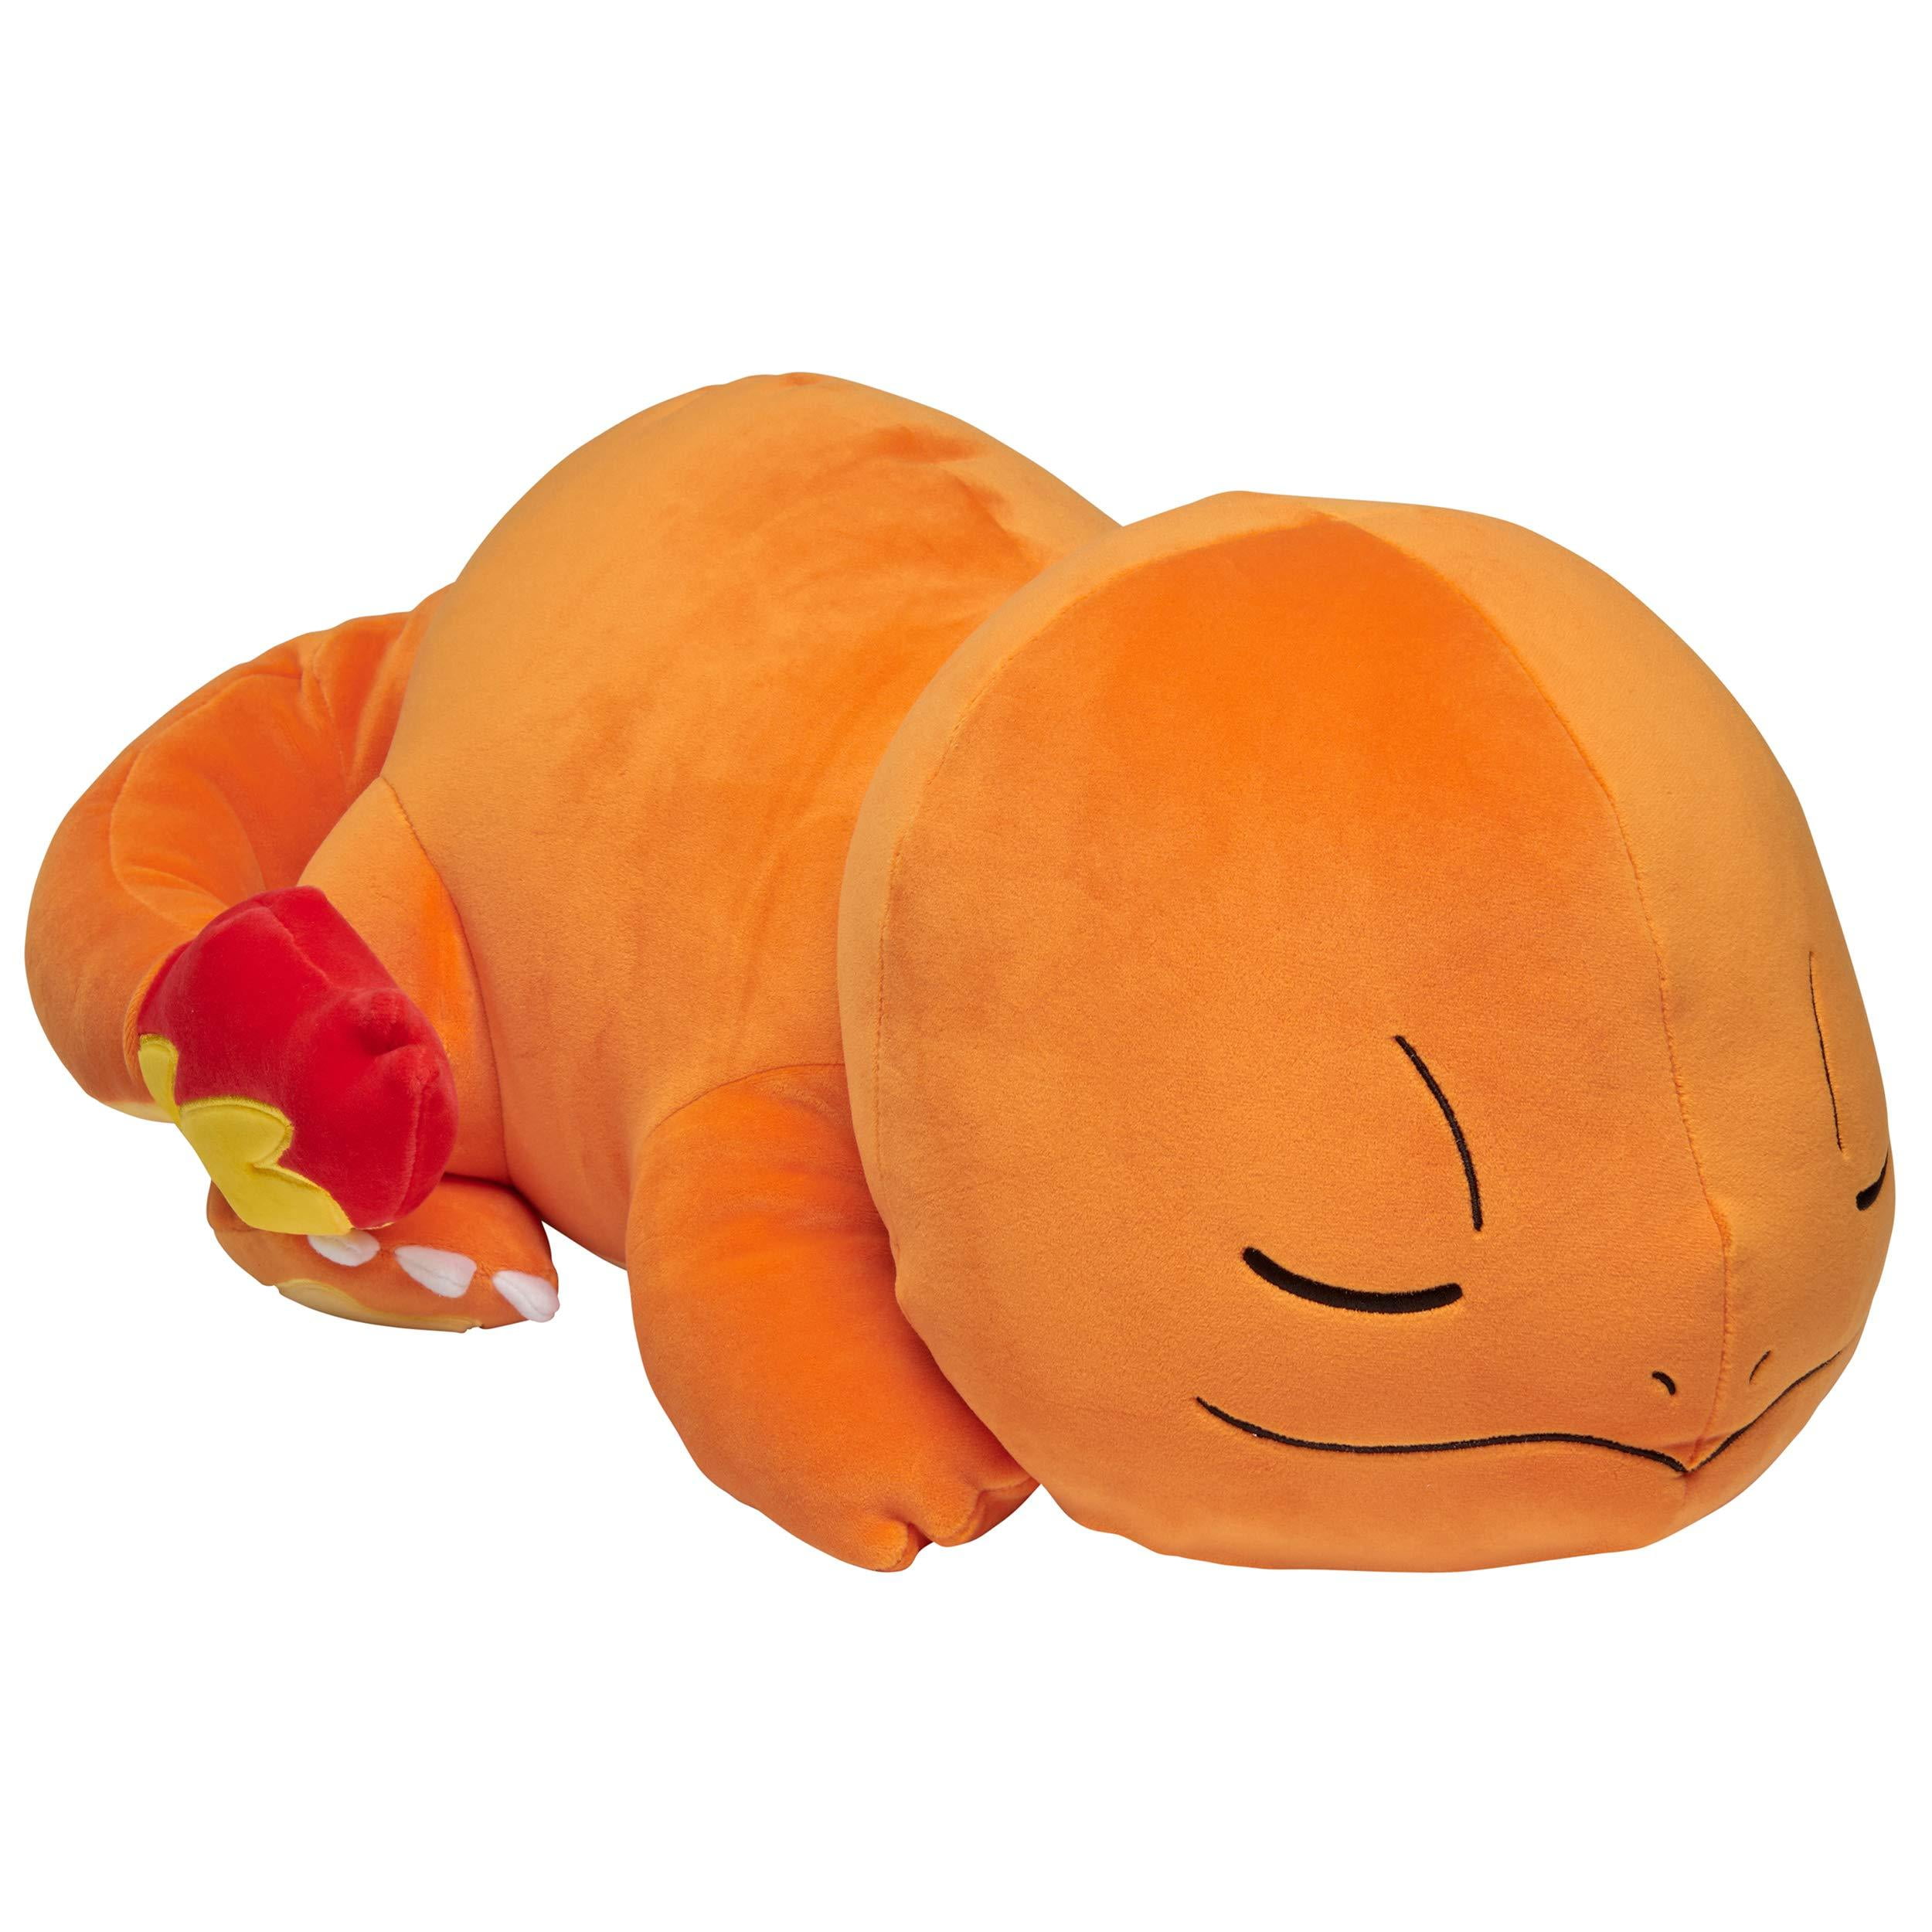 Set of 2 Wicked Cool Toys Pokémon 8 Charmander & 12 Charizard Plush Stuffed Animal Toy Ages 2+